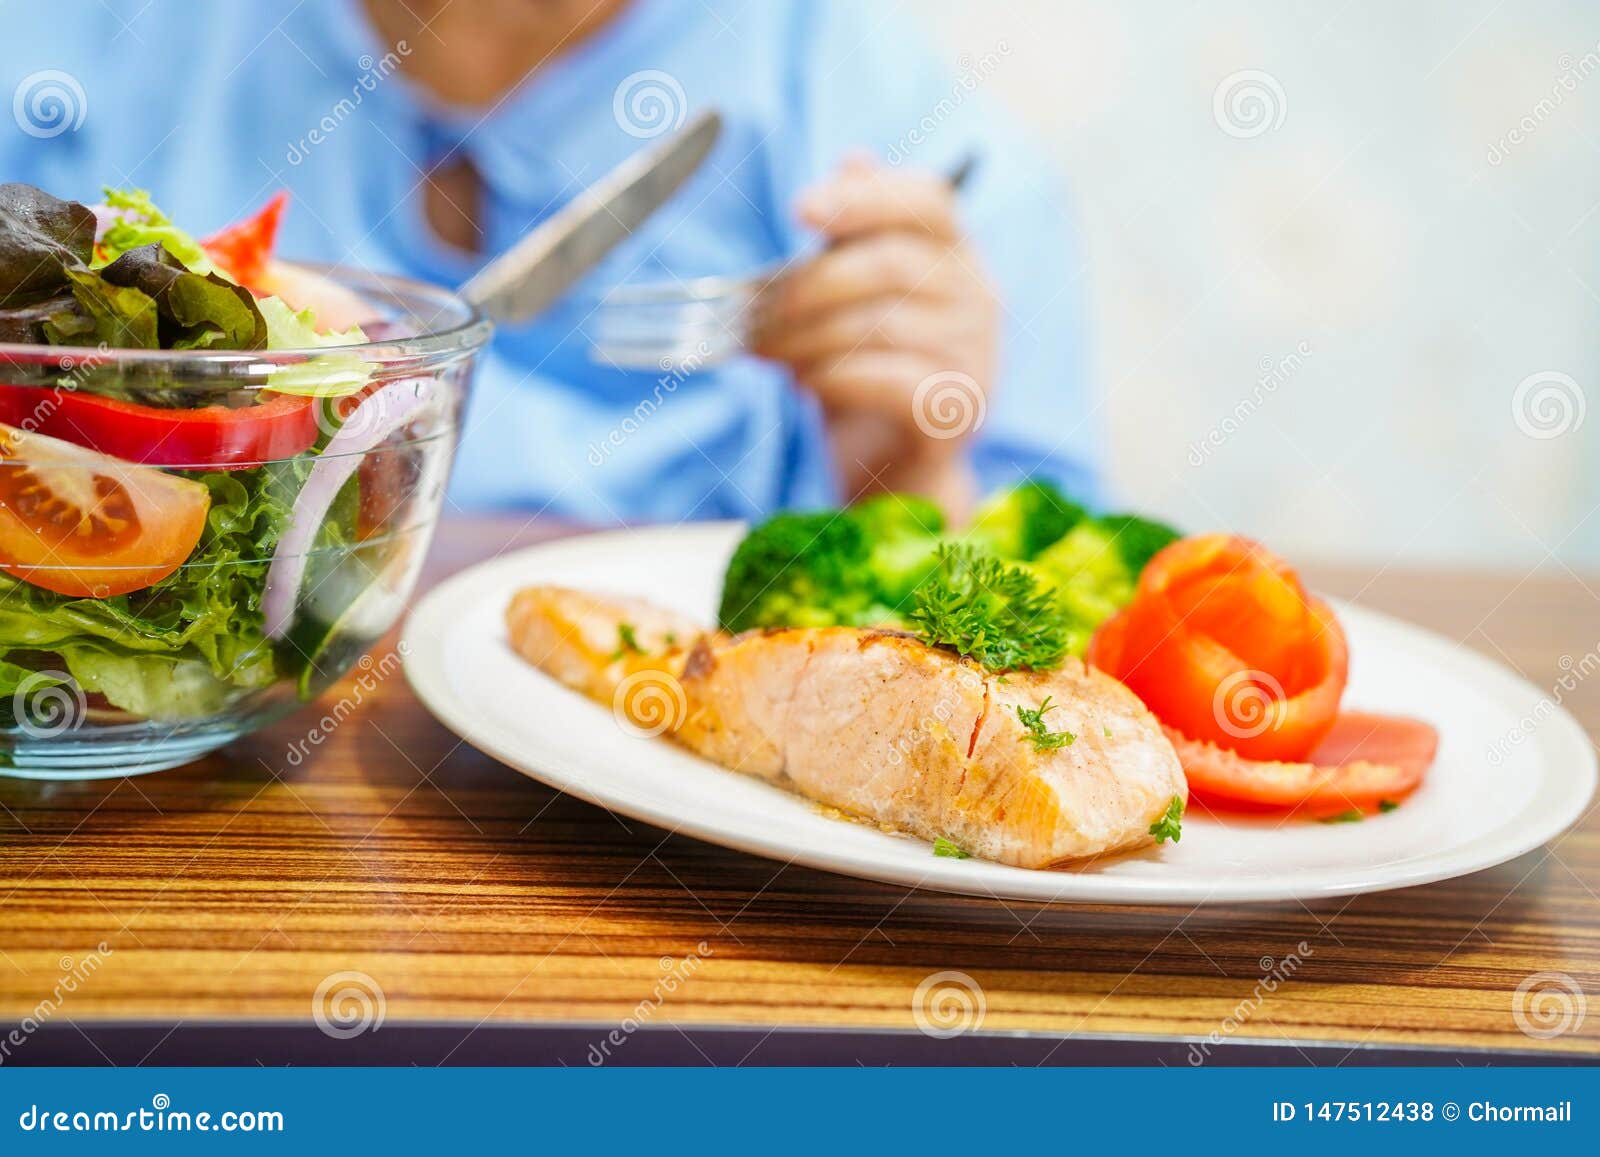 Asian Senior or Elderly Old Lady Woman Patient Eating Breakfast Healthy ...